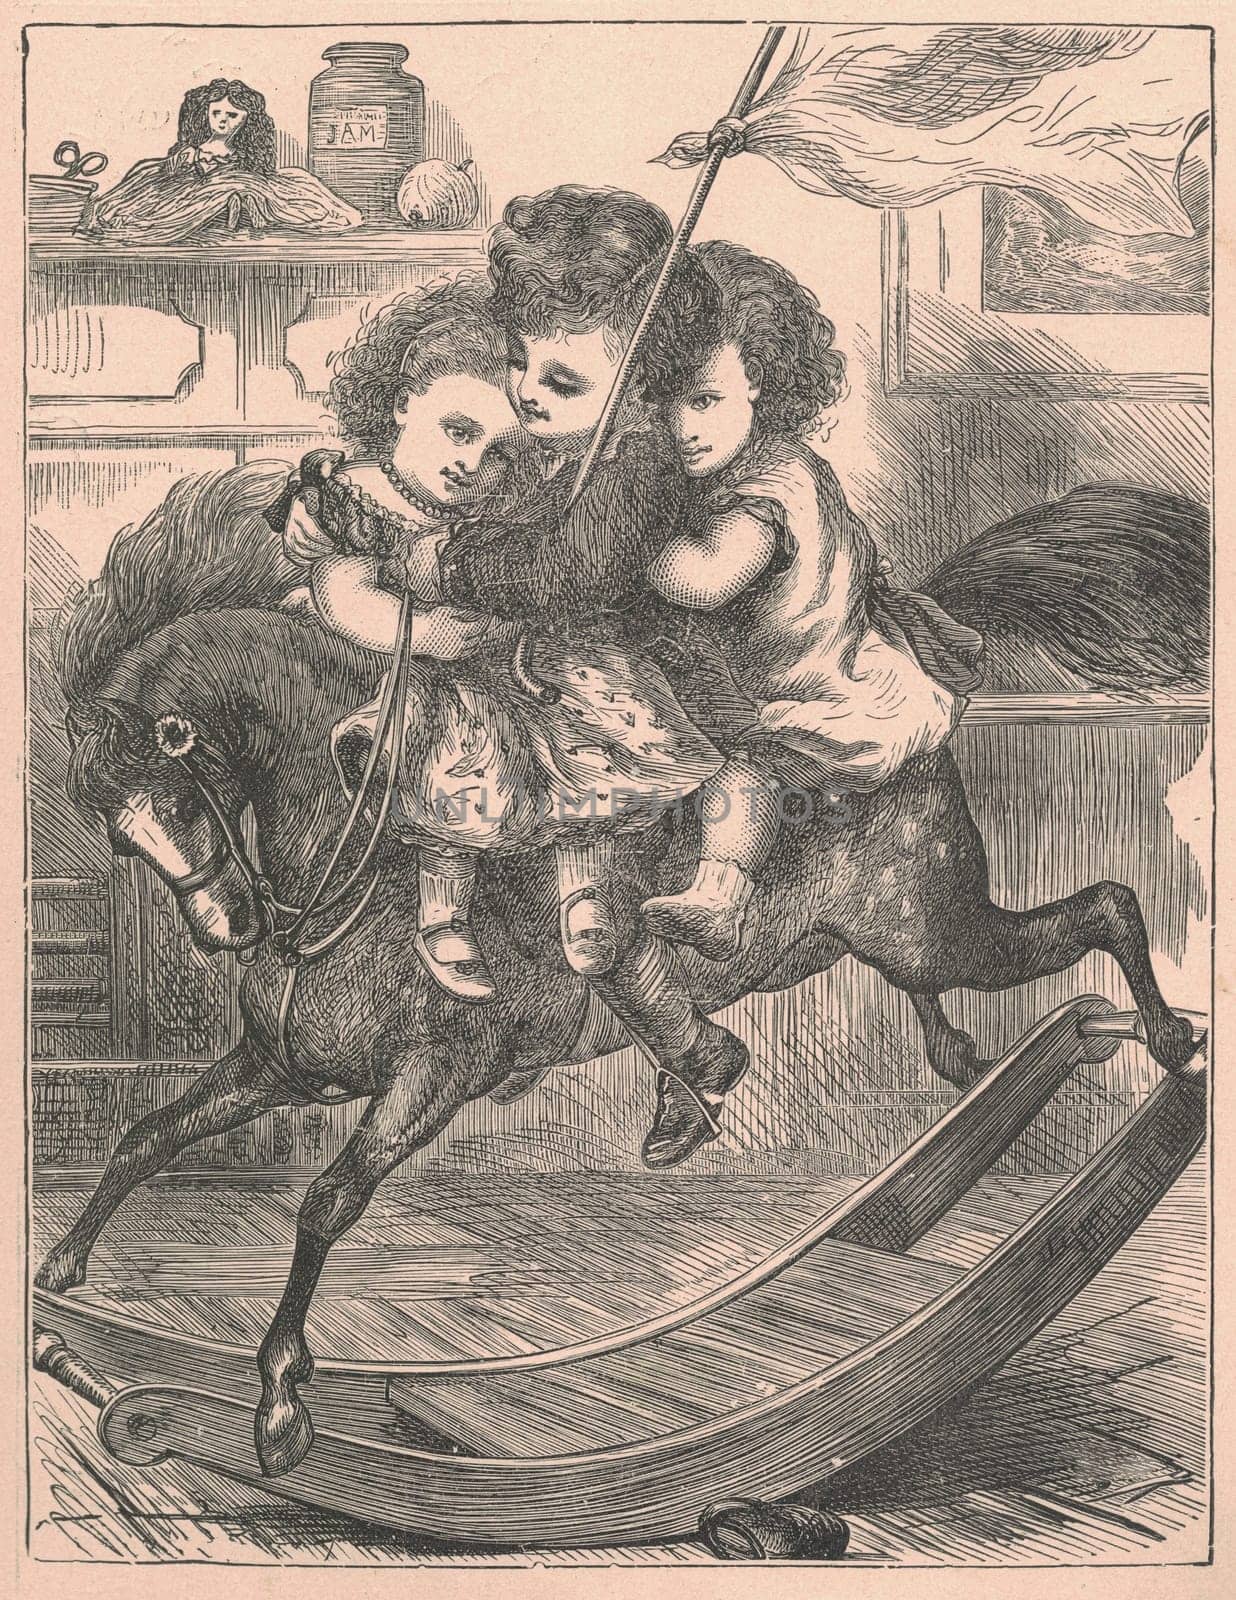 Black and white antique illustration shows children swing on a rocking horse. Vintage drawing shows the children swing on the rocking horse. Old picture from fairy tale book. Storybook illustration published 1910. A fairy tale, fairytale, wonder tale, magic tale, fairy story or Marchen is an instance of folklore genre that takes the form of a short story. Such stories typically feature mythical entities such as dwarfs, dragons, elves, fairies and Peris, giants, Divs, gnomes, goblins, griffins, mermaids, talking animals, trolls, unicorns, or witches, and usually magic or enchantments.